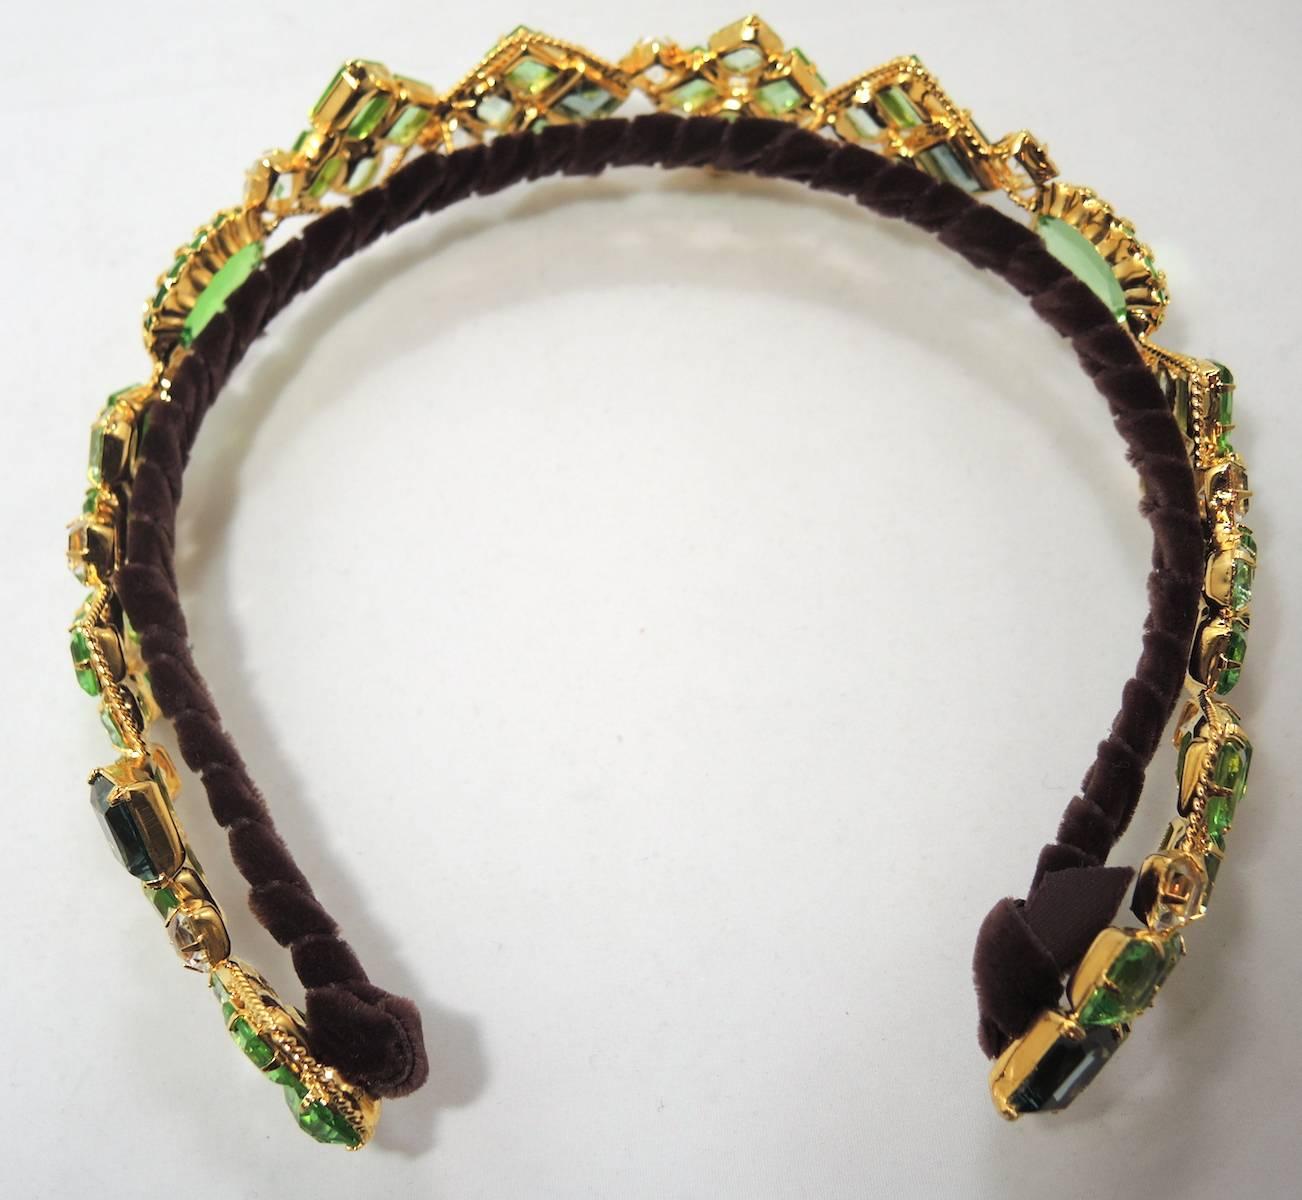 This is a one-of-a-kind headband designed by Robert Sorrell. The design is exquisite and perfect for day or night. It features multi-color crystals including faux Peridot and clear crystals. The headband is hand made in an abstract design and is